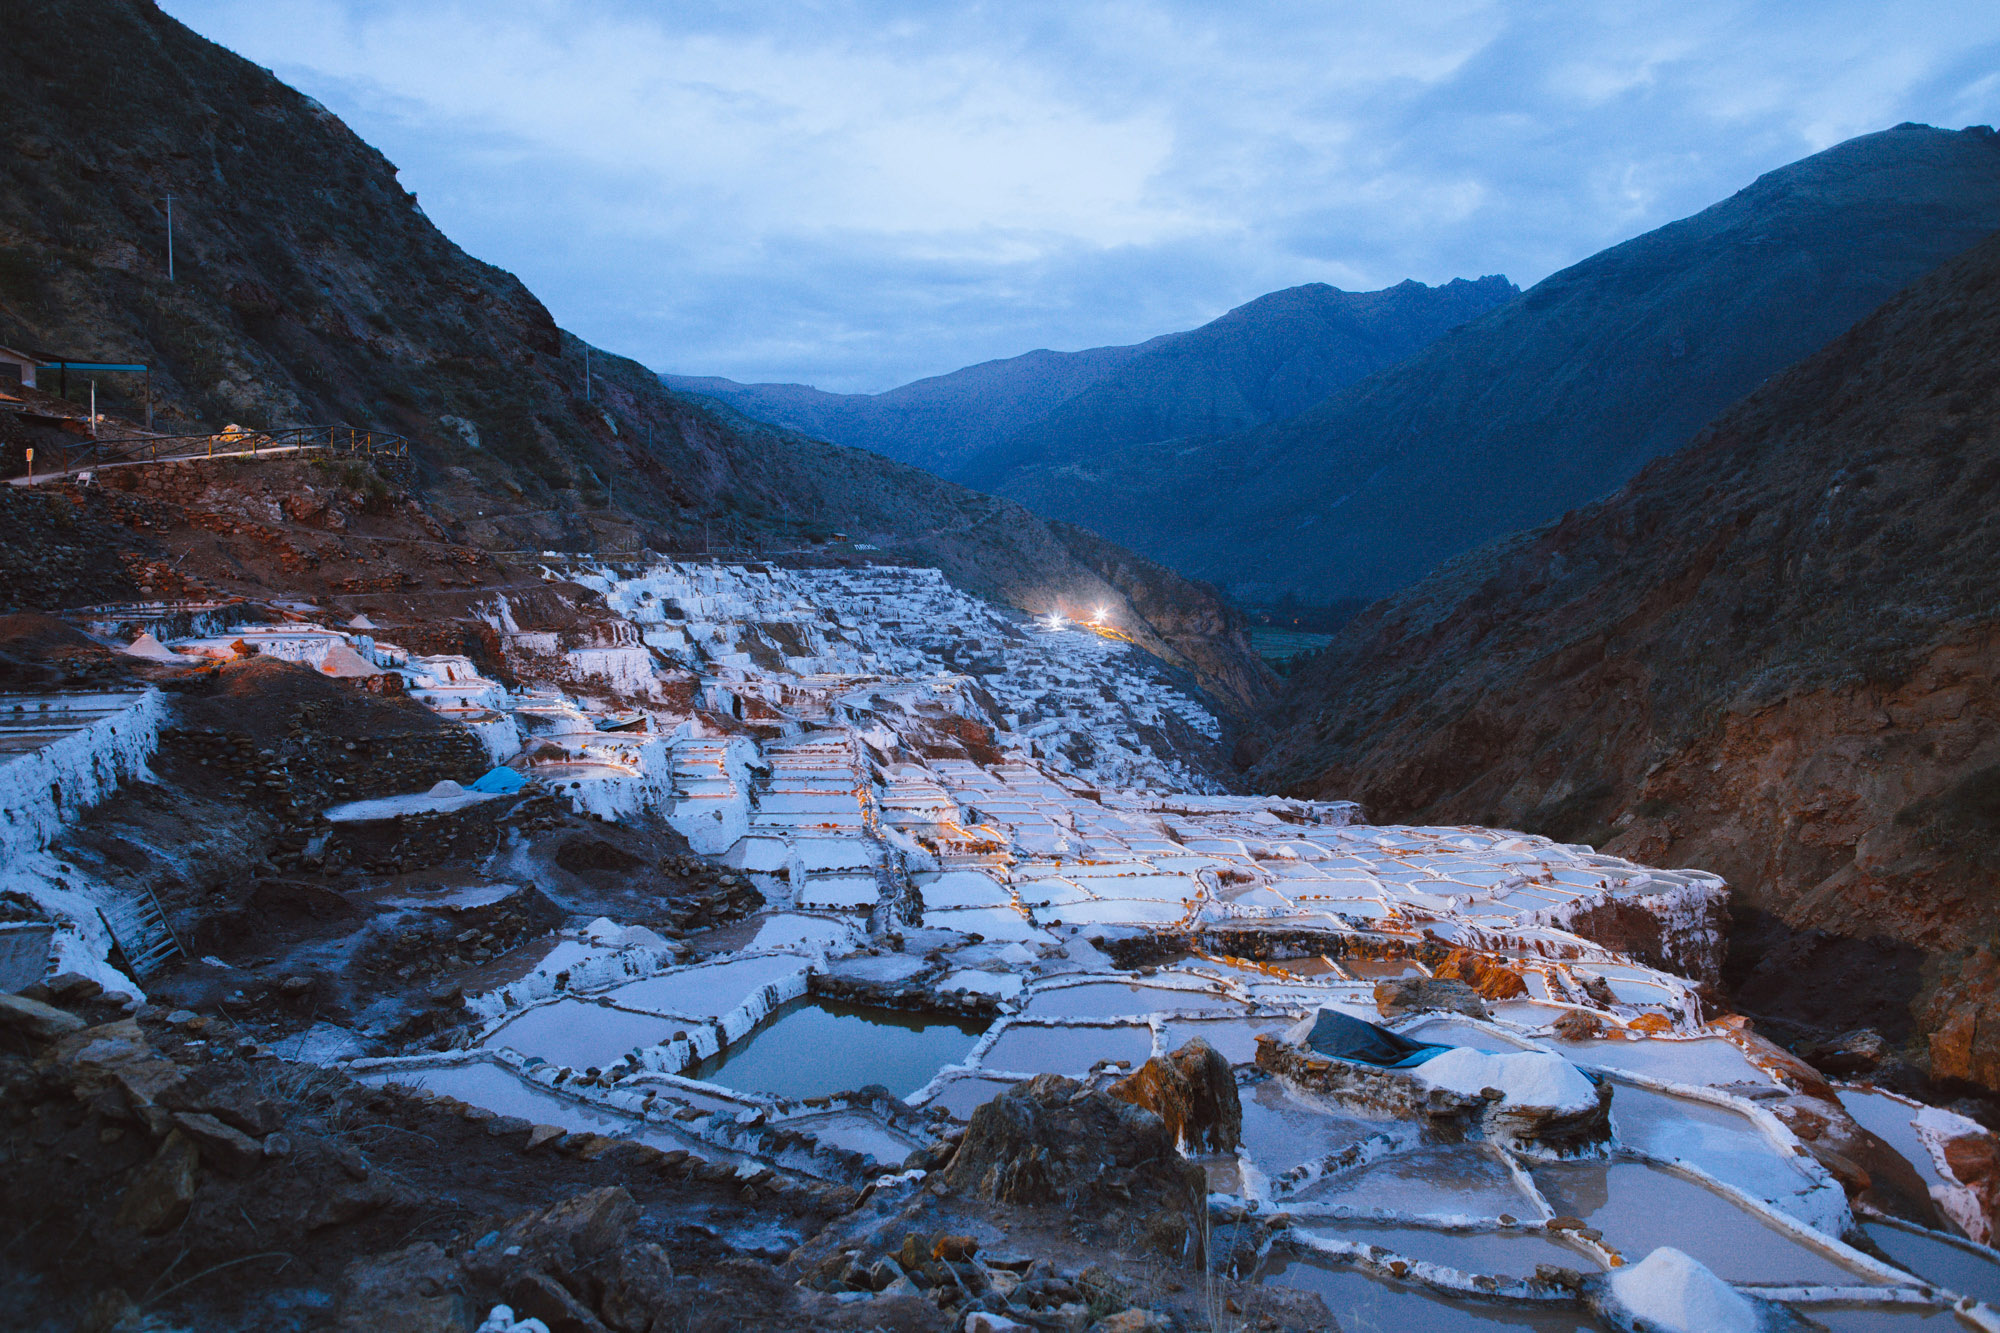 Añay Kachi: The Salt Workers of the Peruvian Andes